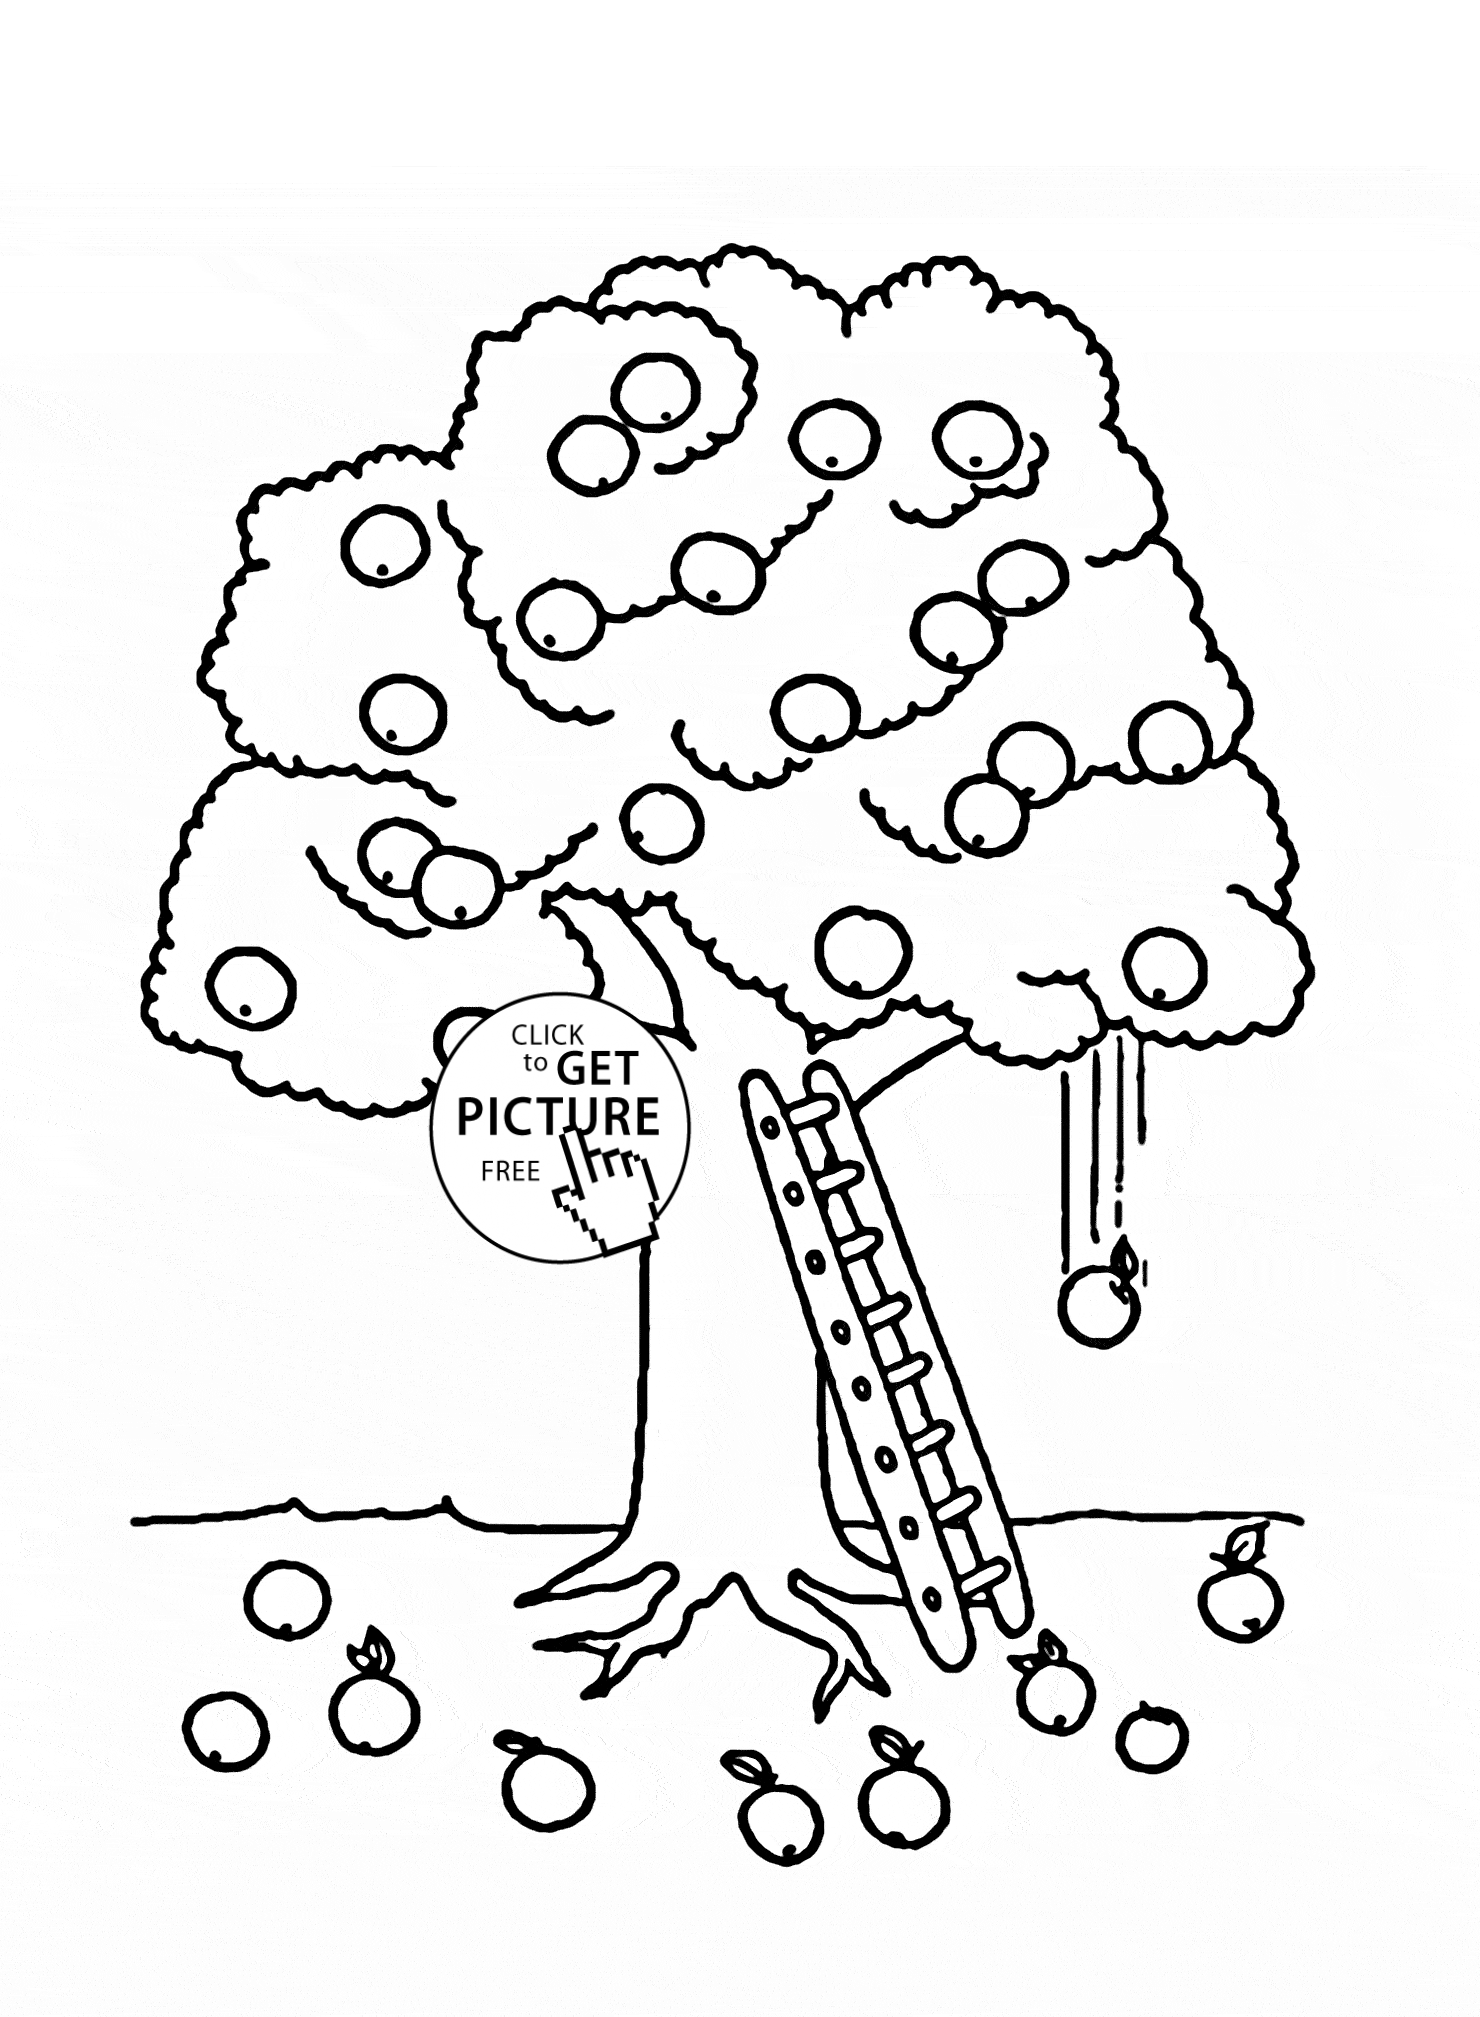 The Apple Tree Coloring Page For Kids, Fruits Coloring Pages ...